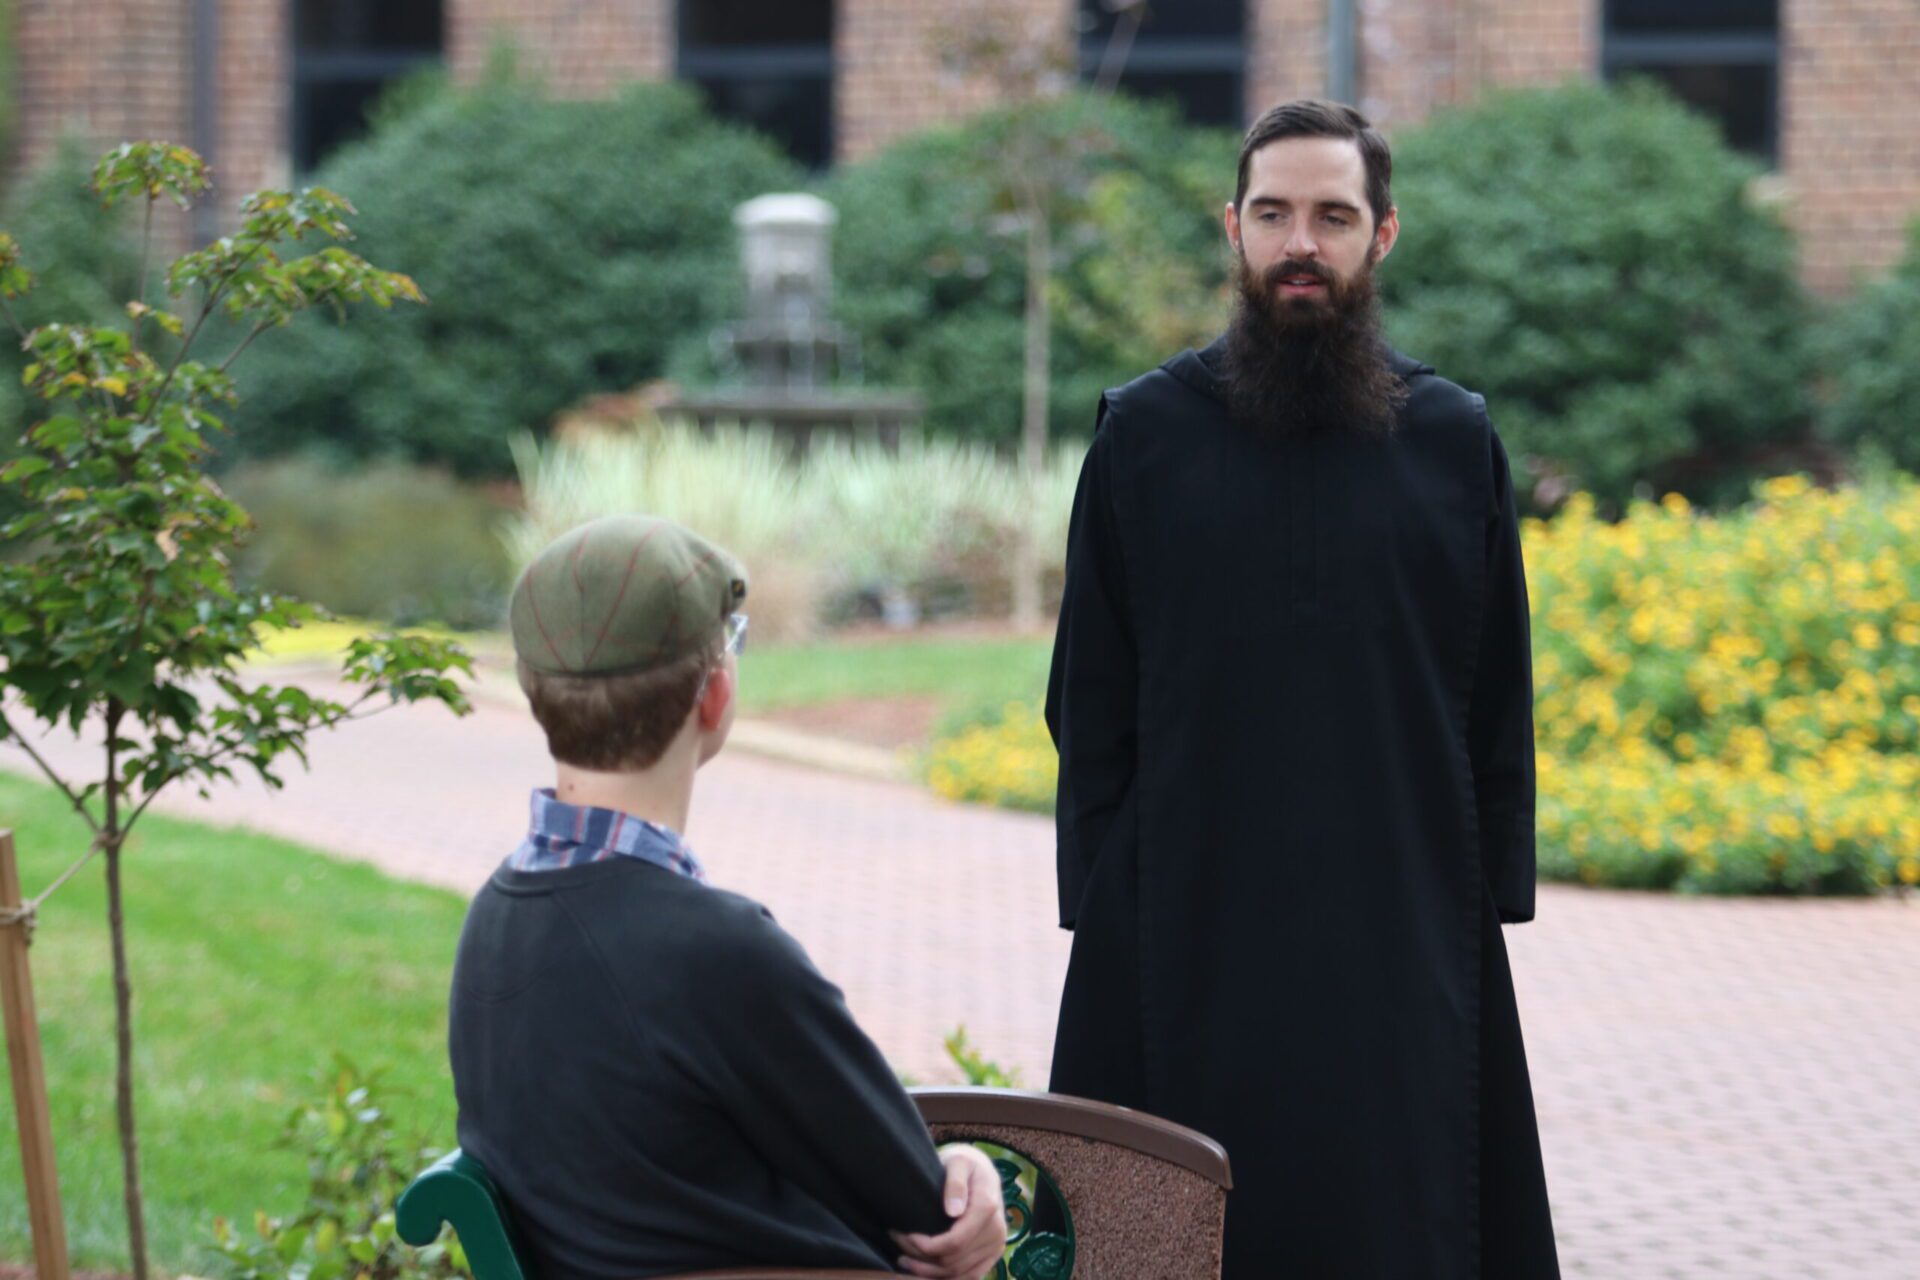 Belmont Abbey priest engaging in conversation on a walk